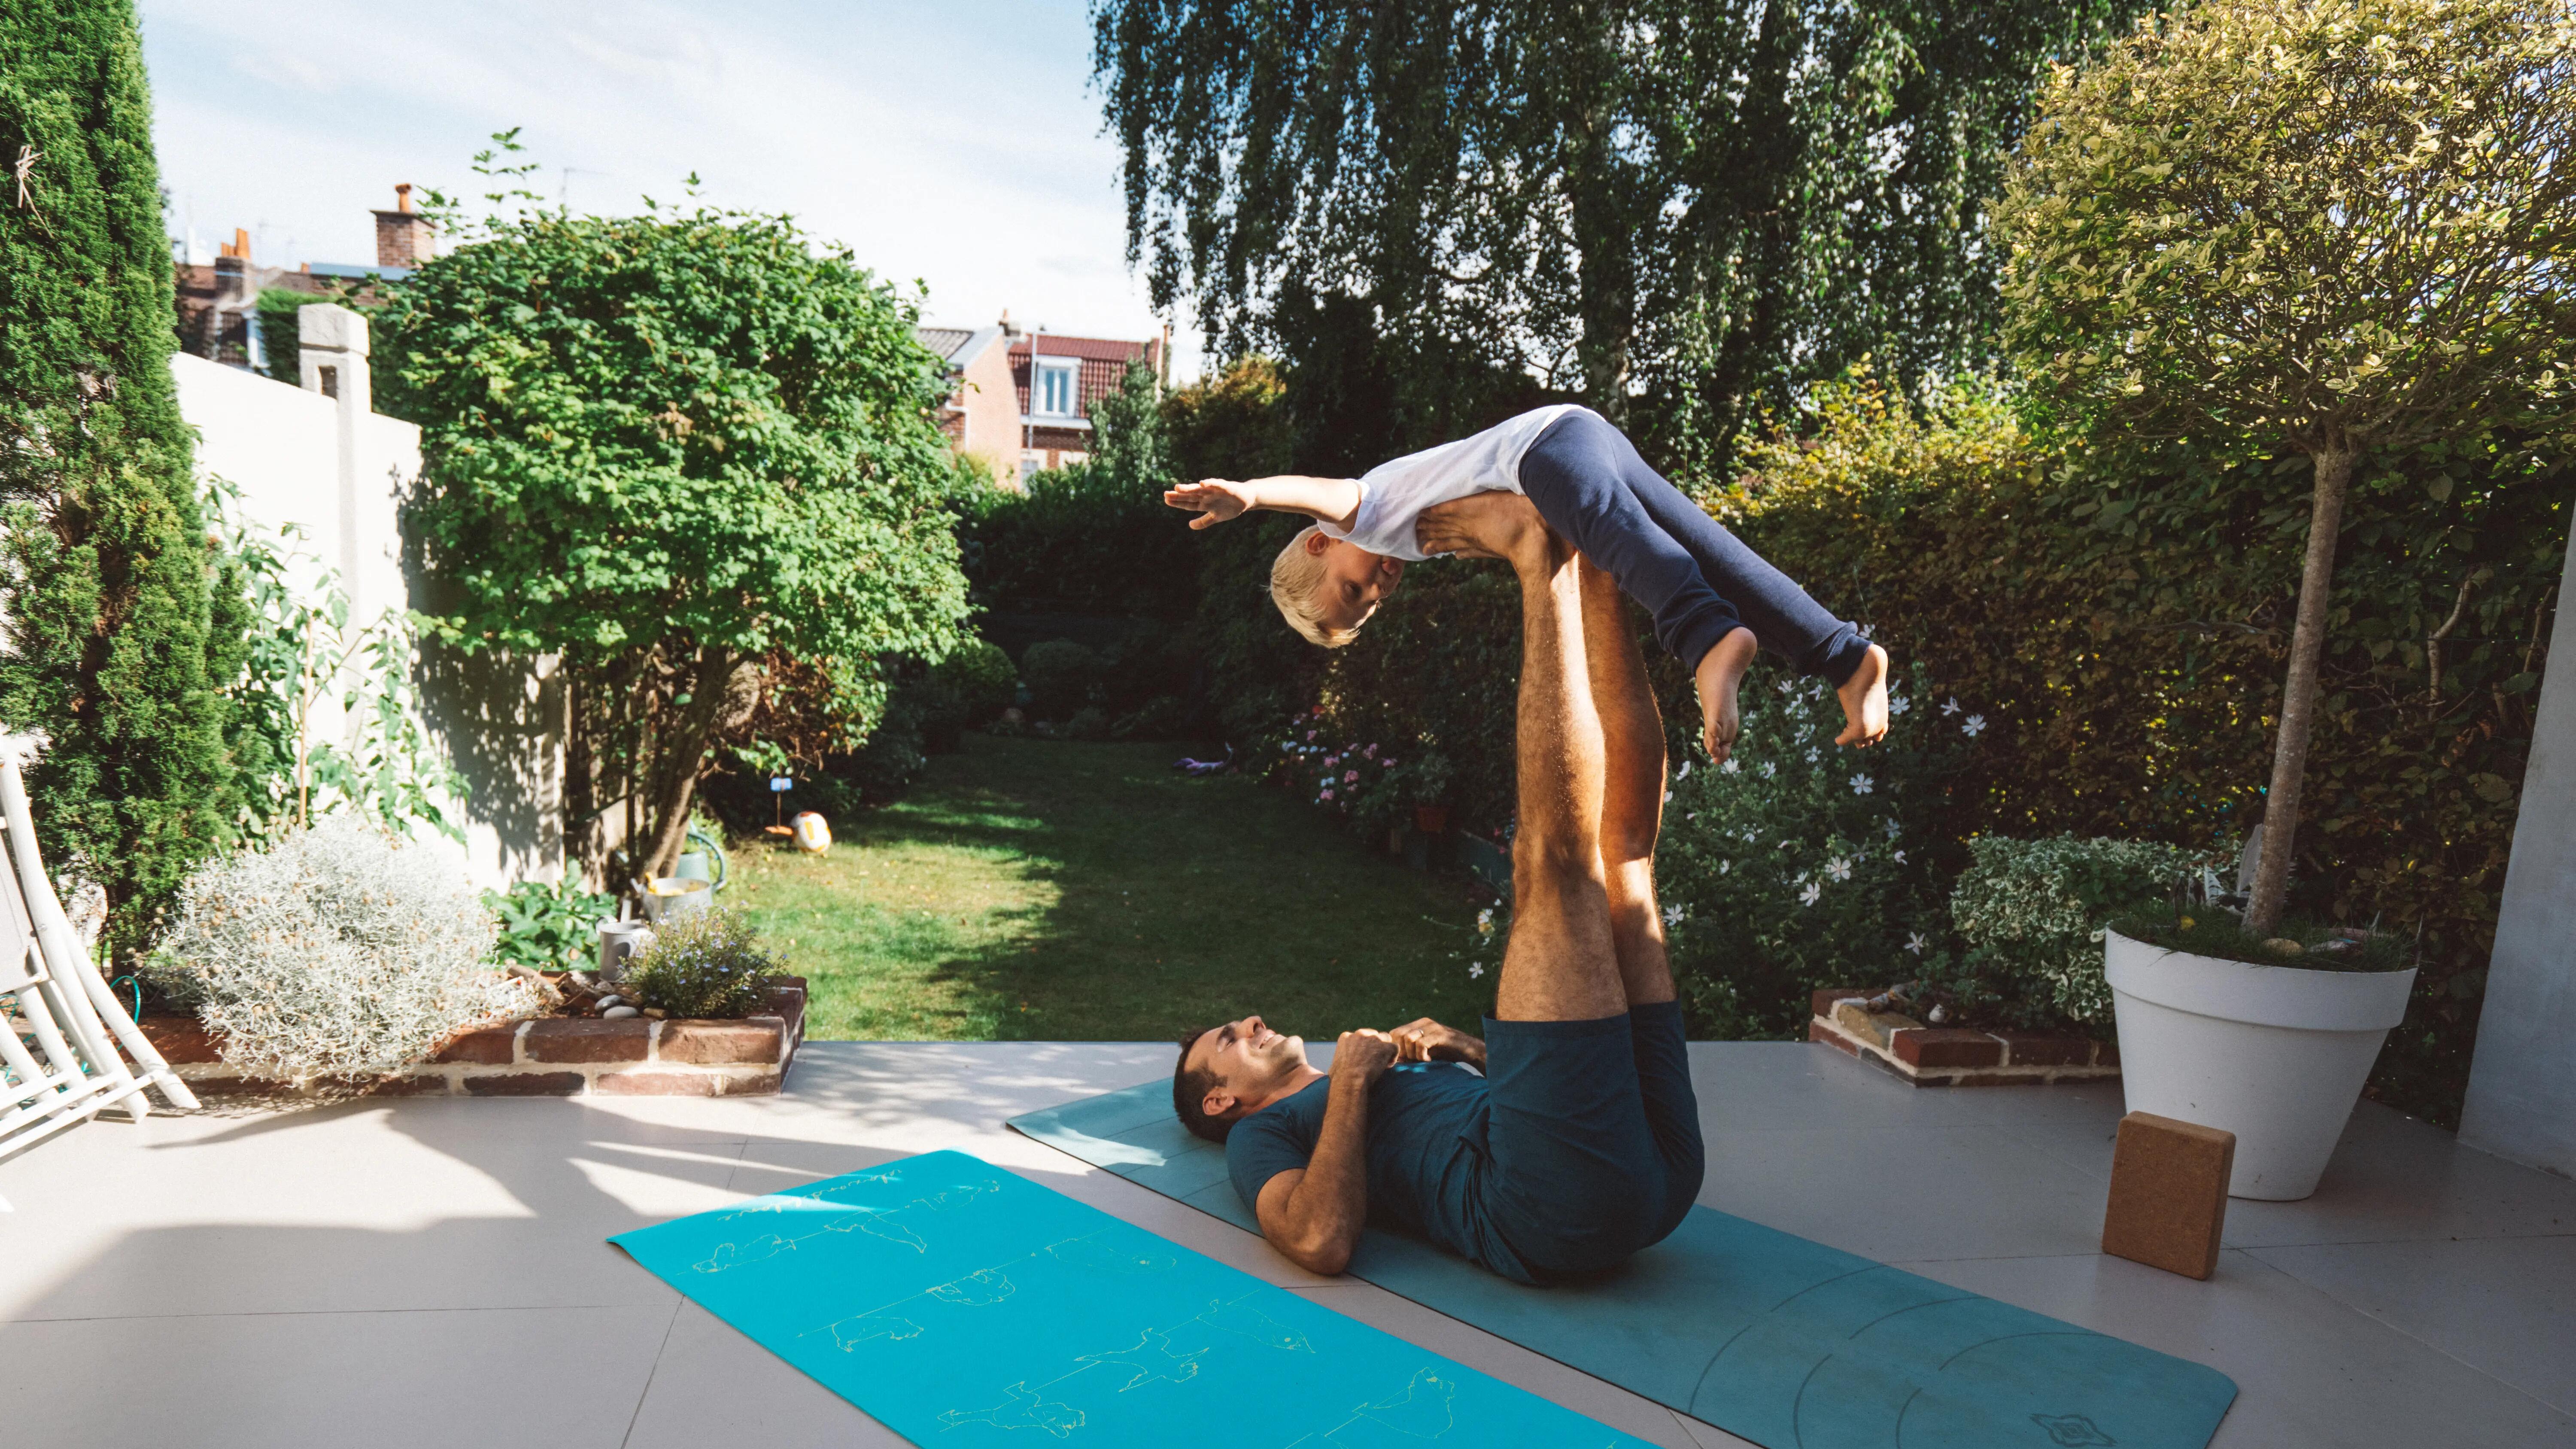 father and son doing yoga